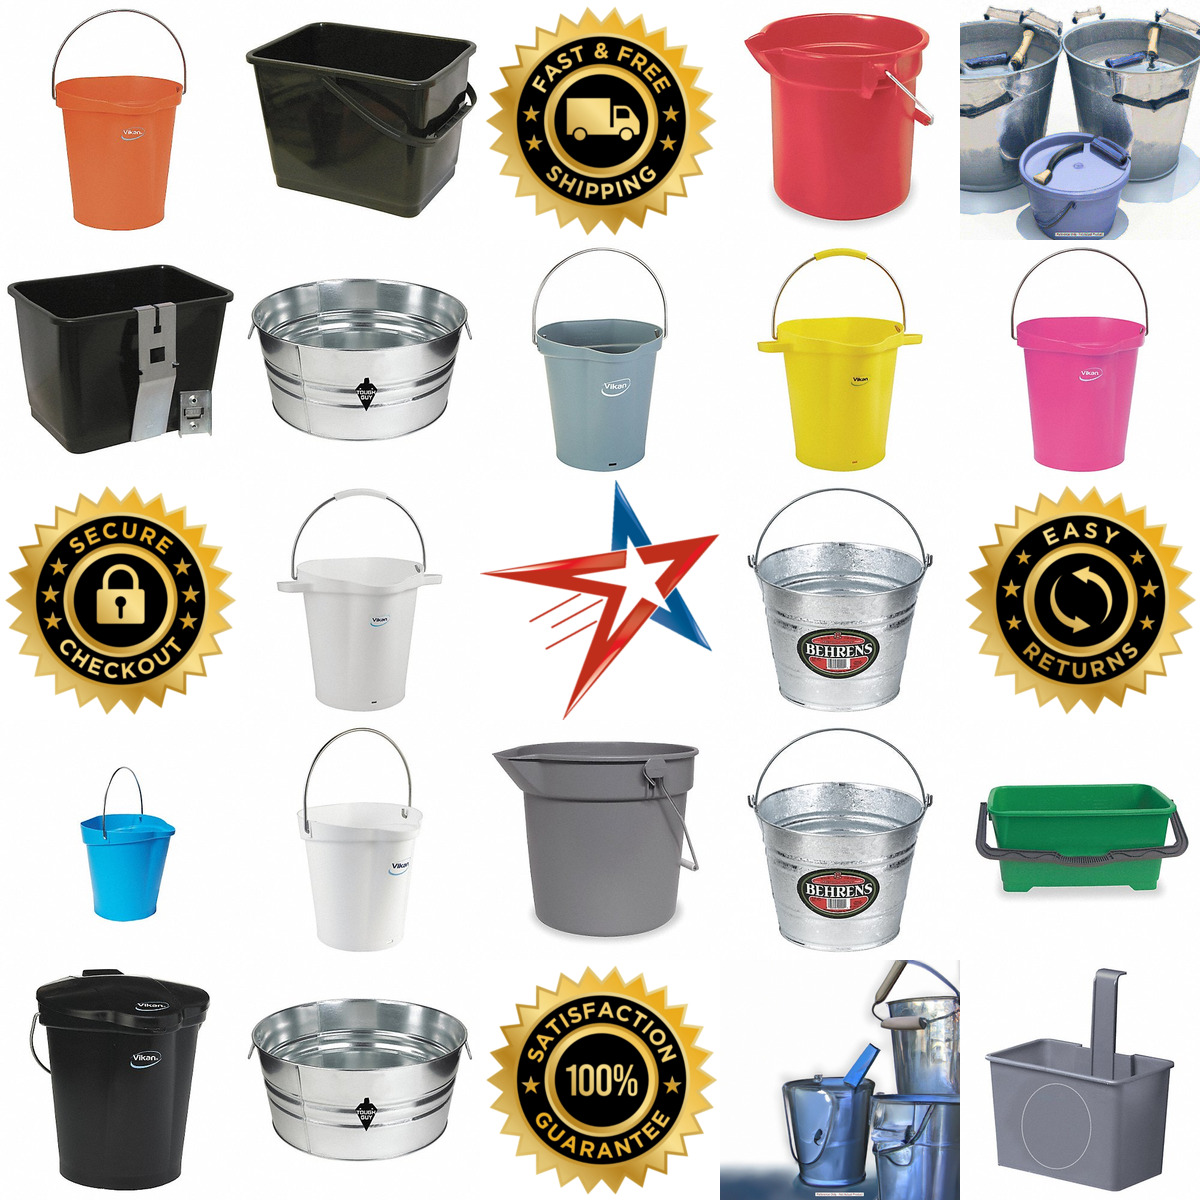 A selection of Buckets and Pails products on GoVets